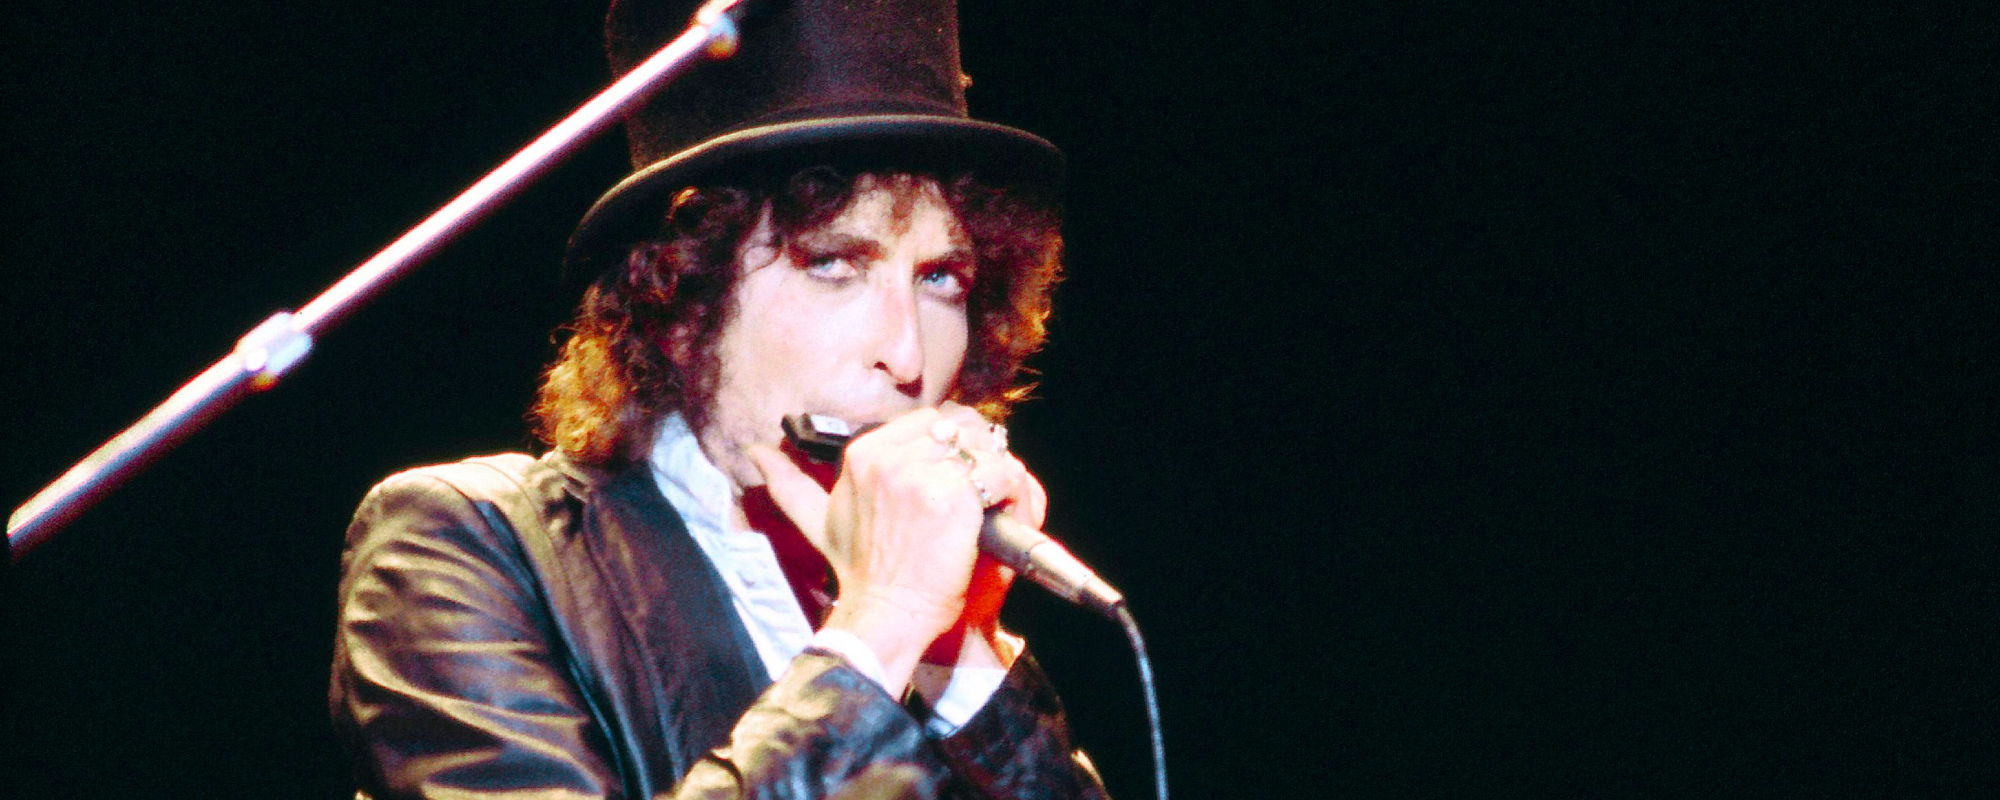 Making the Case for Bob Dylan’s Initially-Maligned 1978 Album ‘Street-Legal’